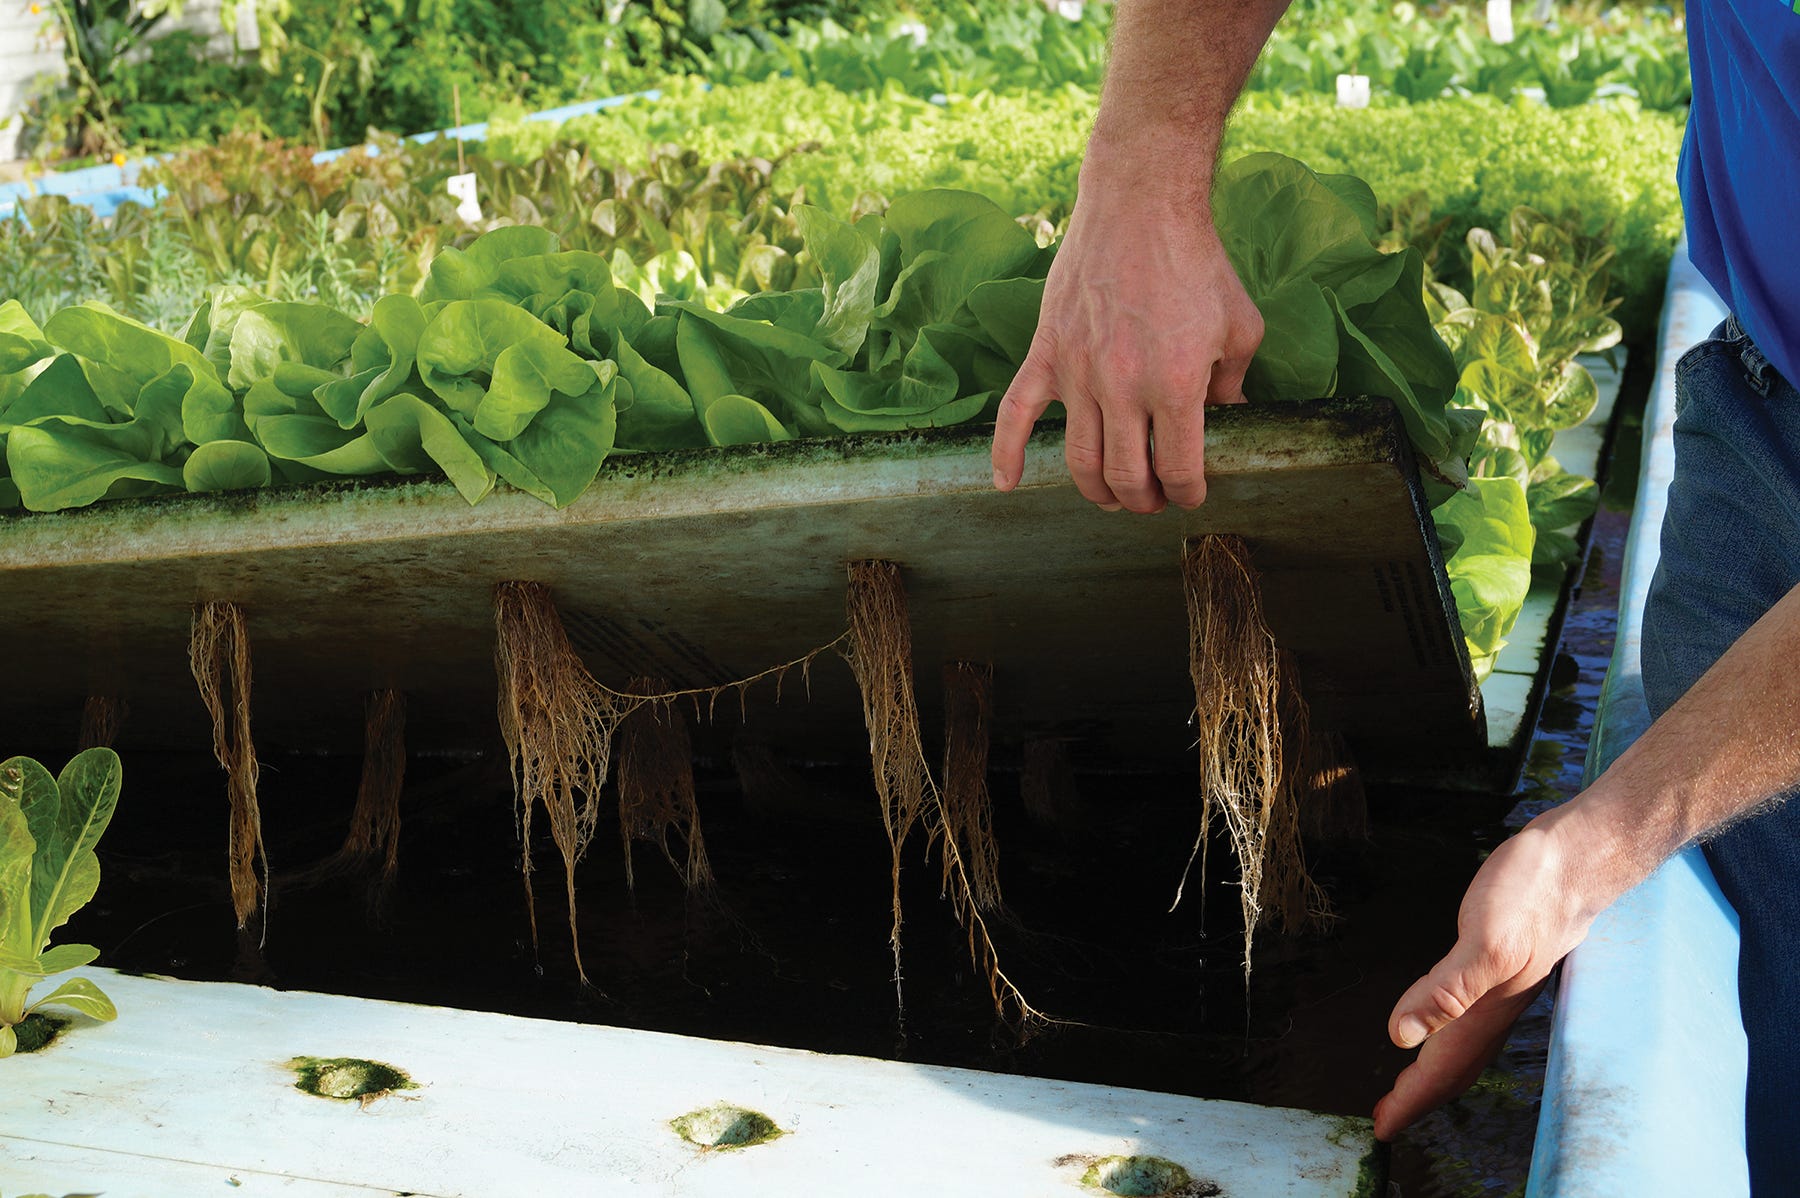 The consistent growing conditions that water provides, gives Lake Orchard Farm’s produce intense flavor year-round.